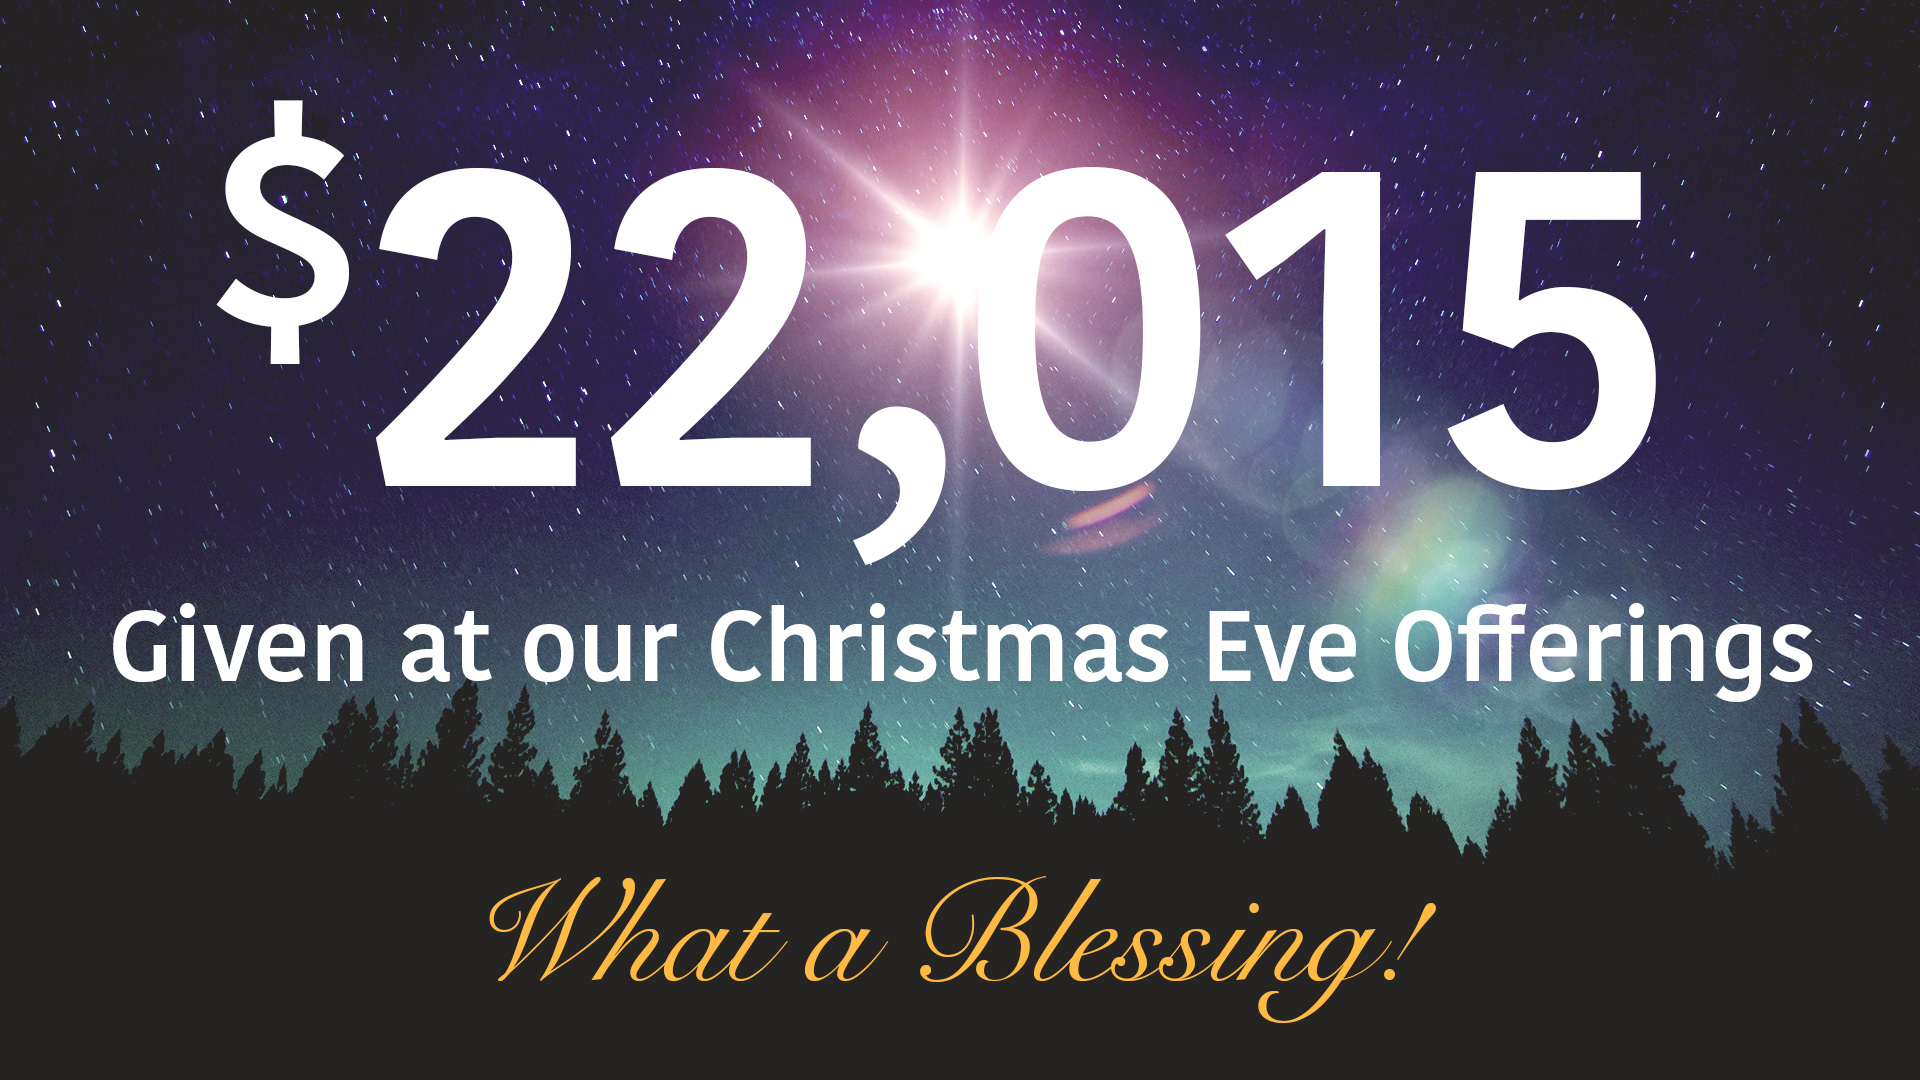 Christmas Eve Offering Total for 2015